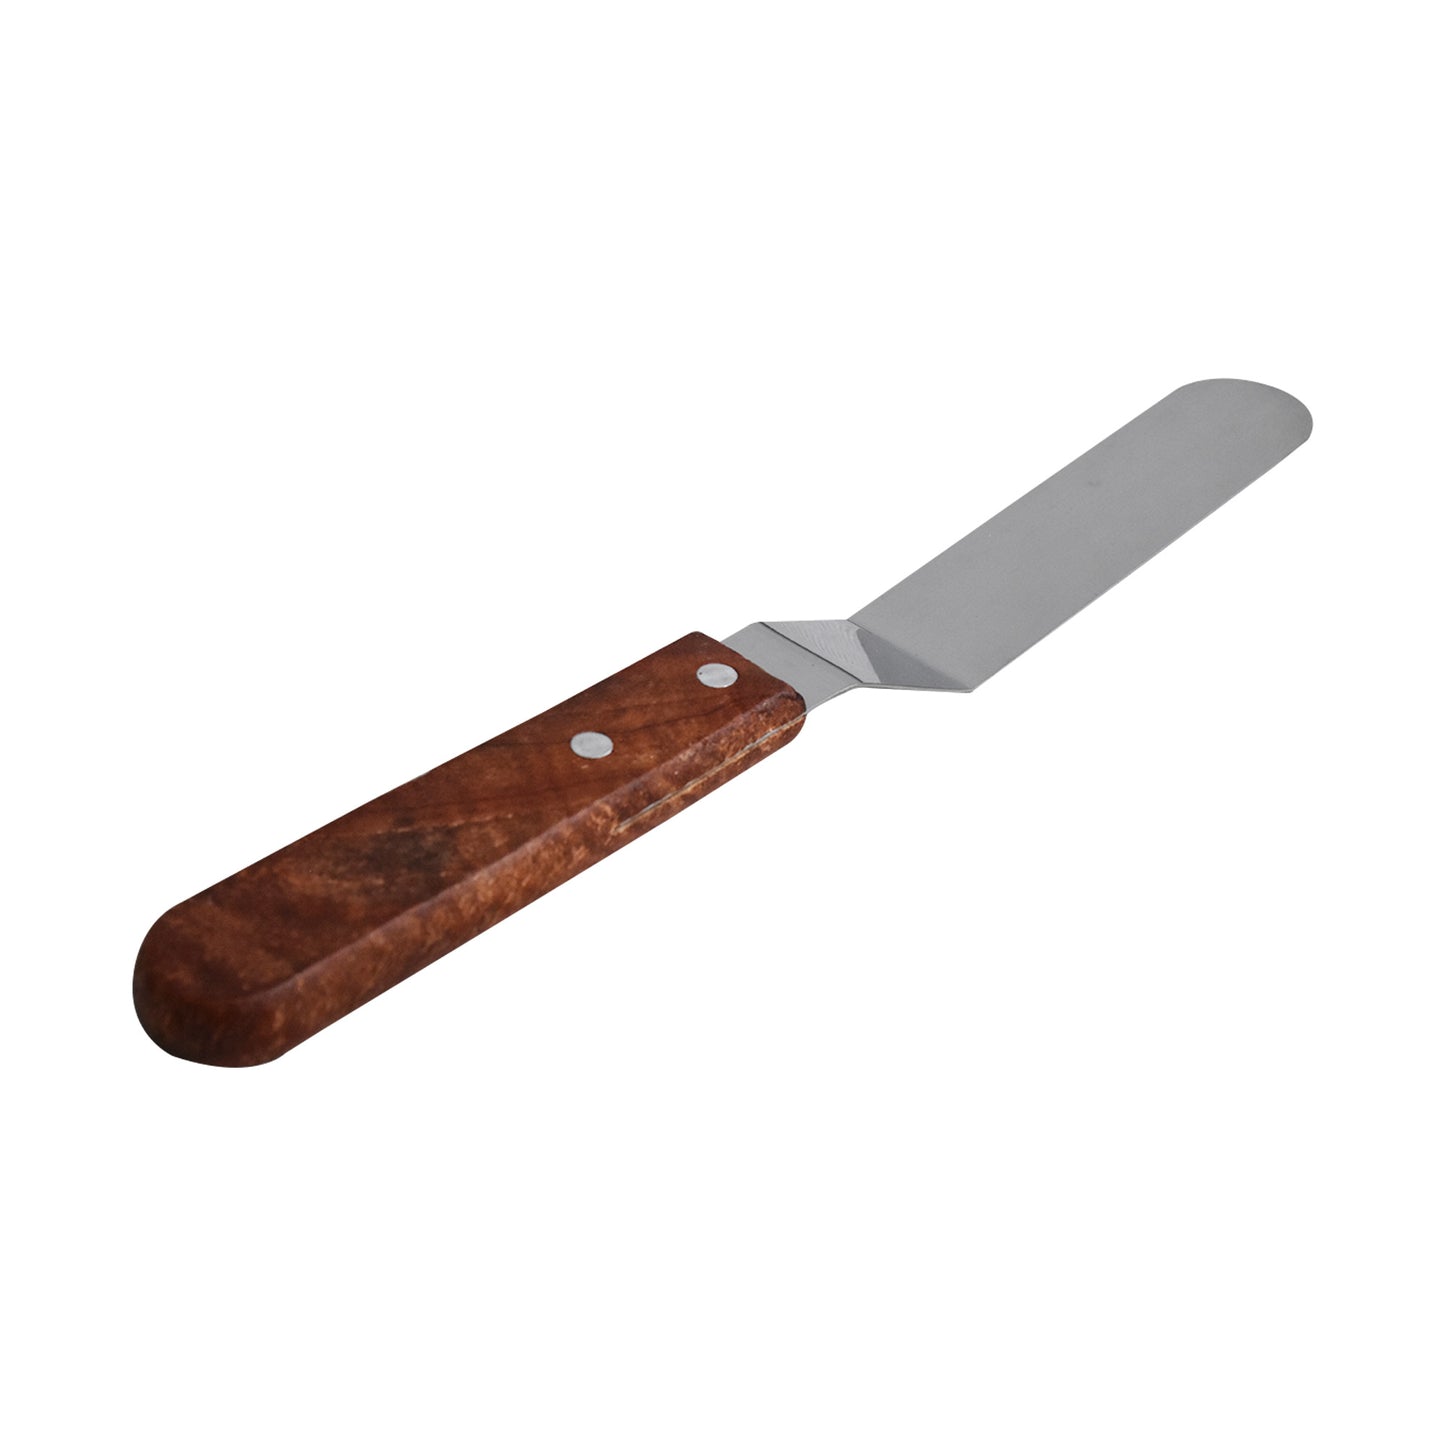 Angled Spatula Knife Steel With Wood Handle Small